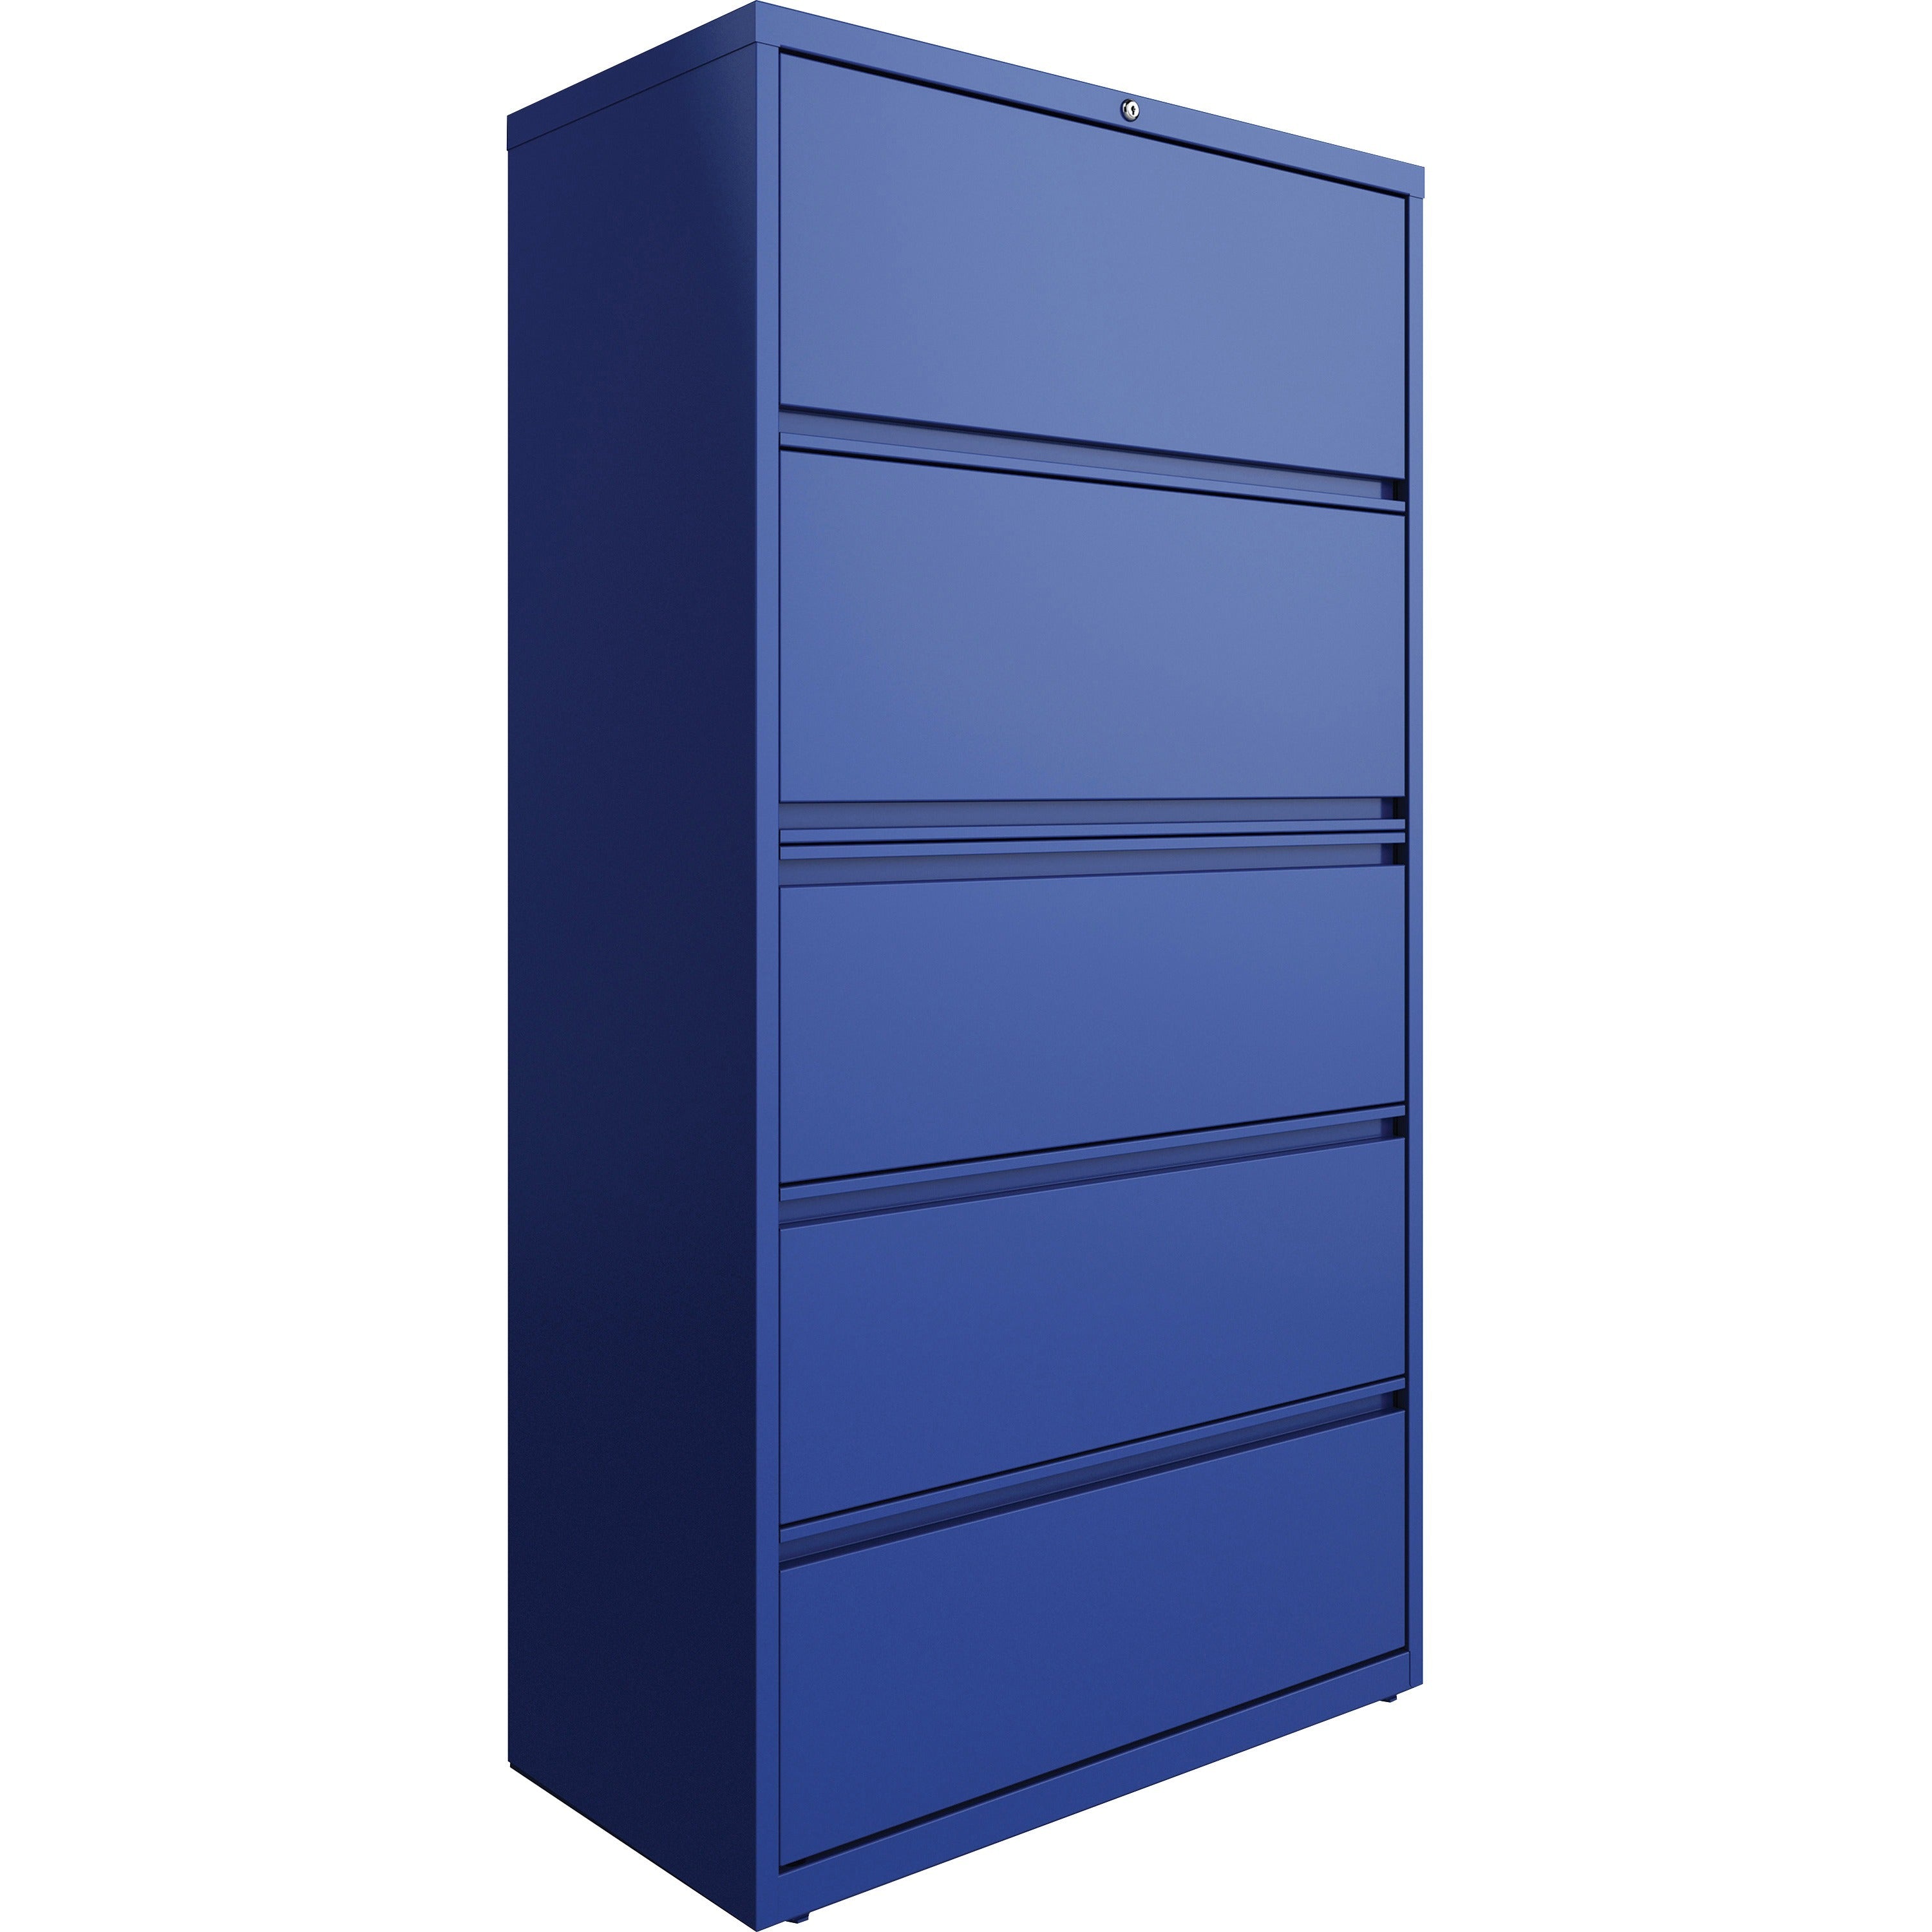 lorell-fortress-series-lateral-file-w-roll-out-posting-shelf-36-x-188-x-678-5-x-drawers-for-file-letter-legal-a4-lateral-hanging-rail-label-holder-durable-nonporous-surface-removable-lock-locking-bar-pull-out-drawer-ball-bea_llr03122 - 1